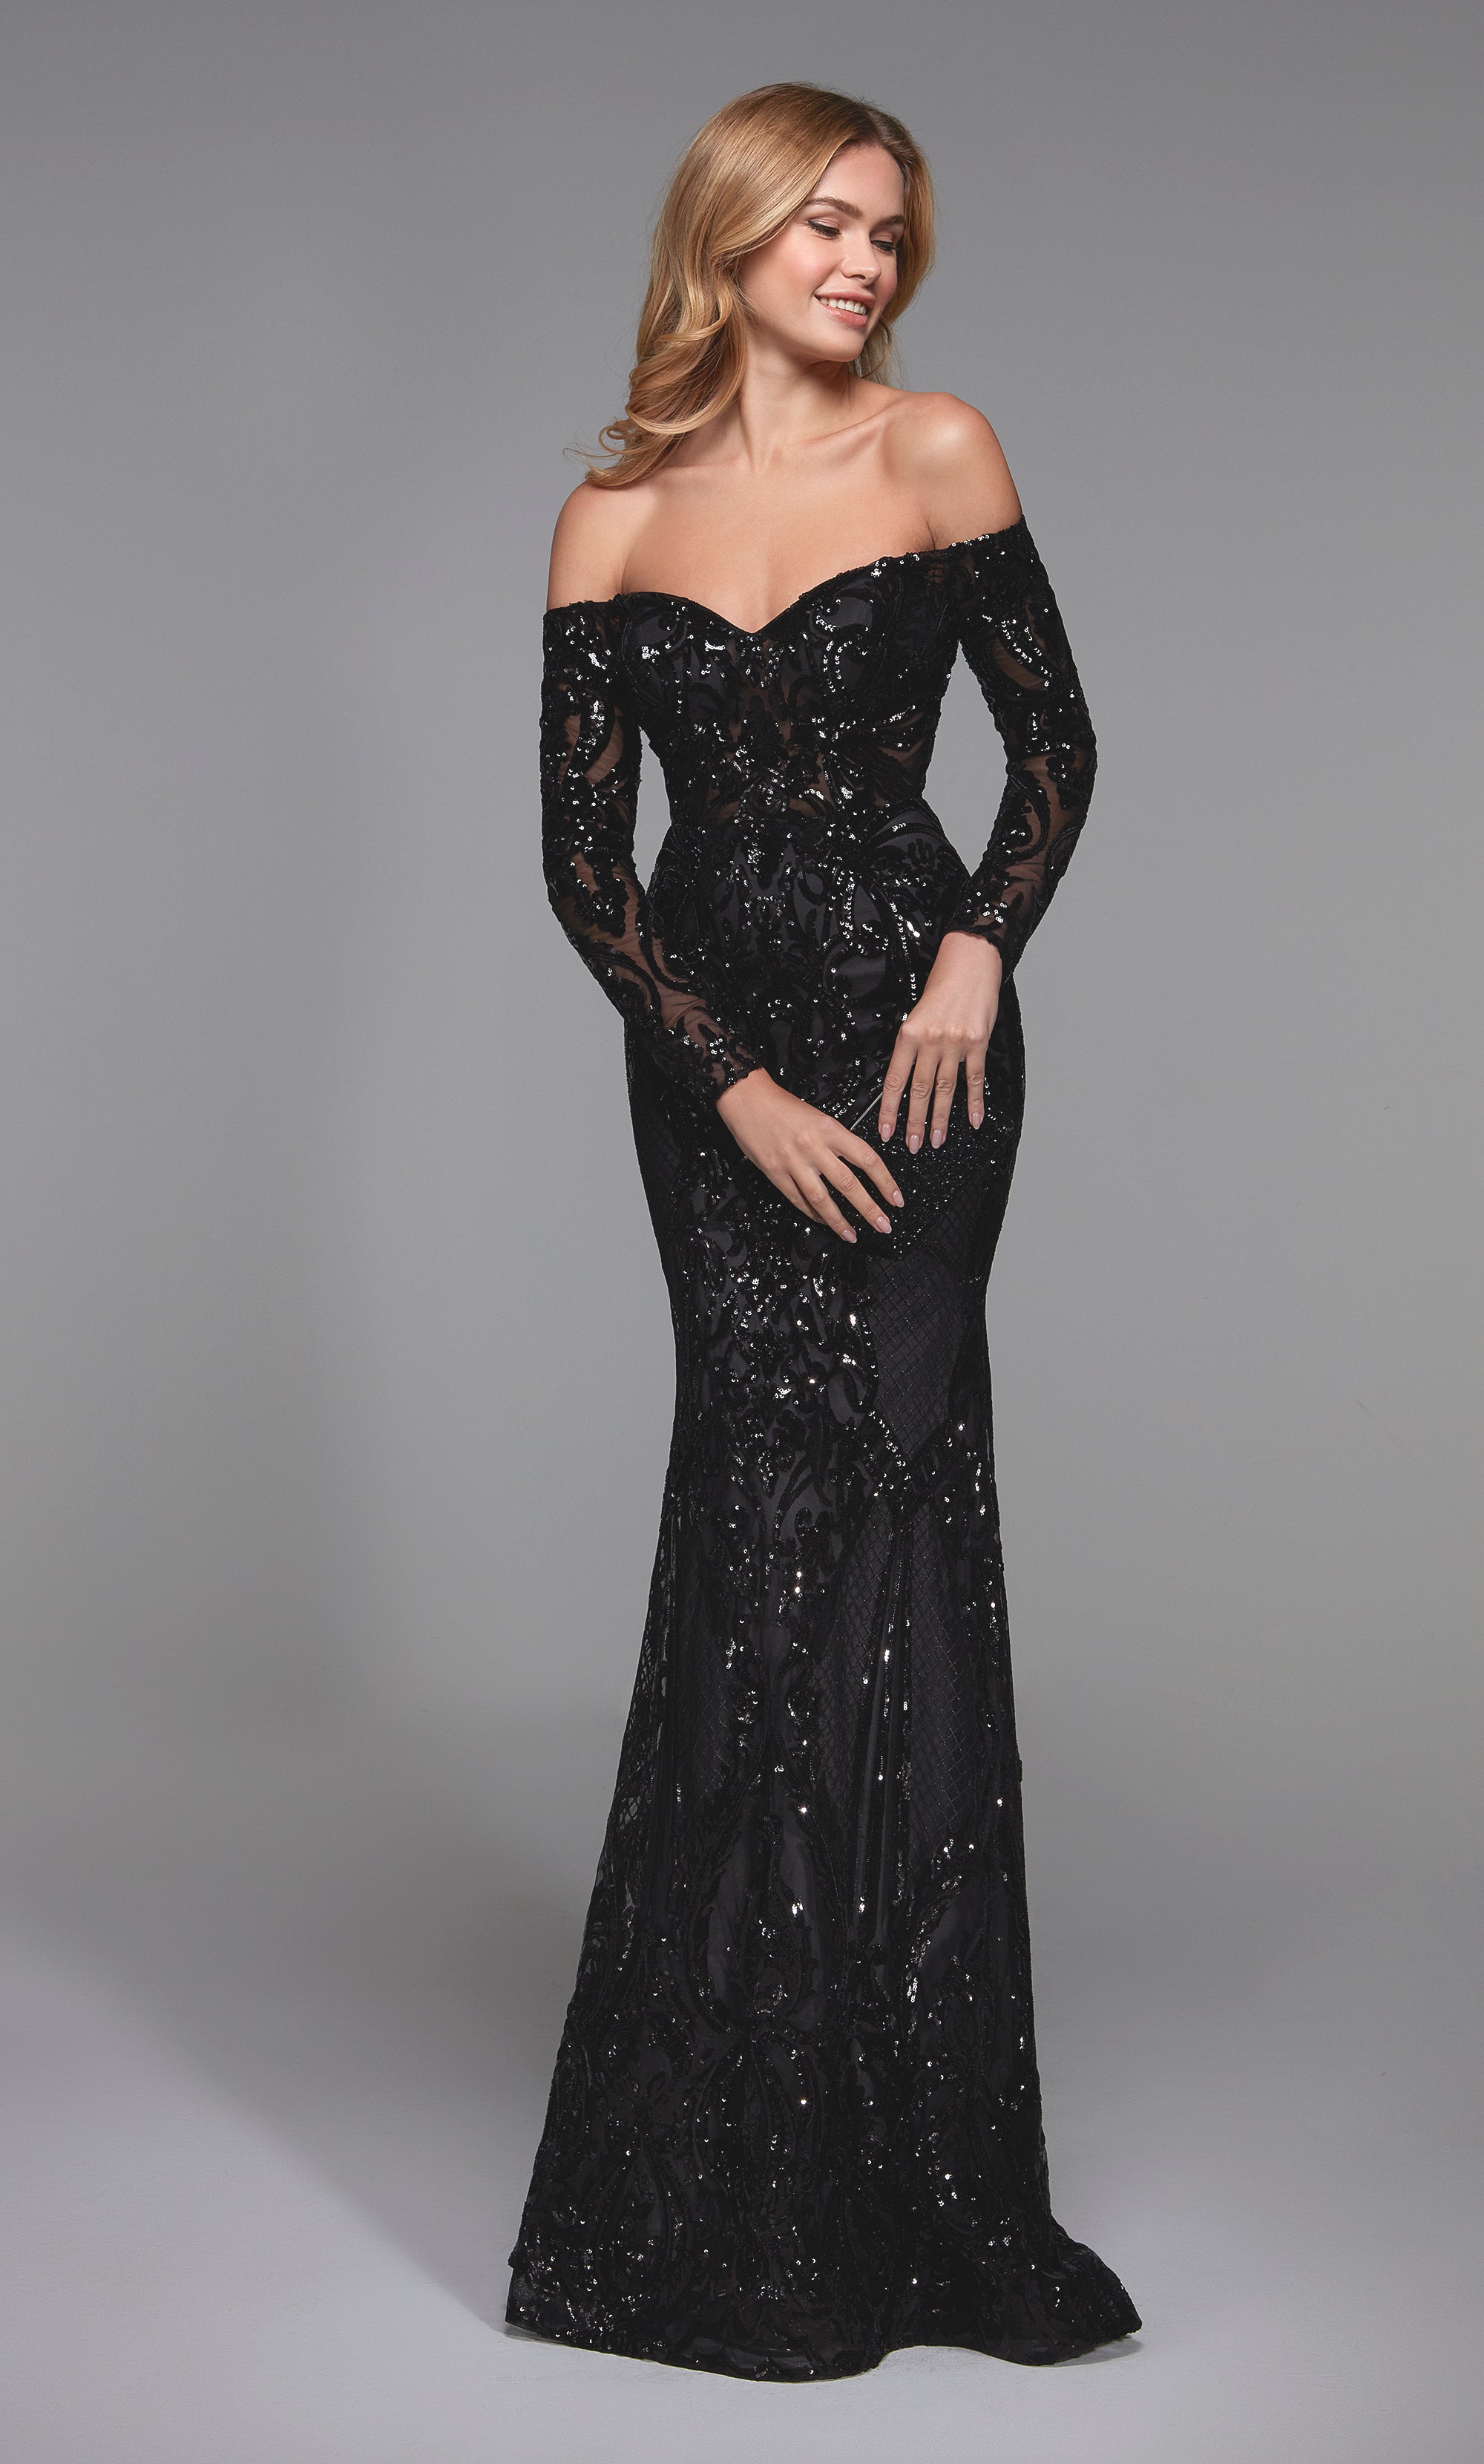 Complete Guide to Black Tie Dresses for Women - What to Wear?